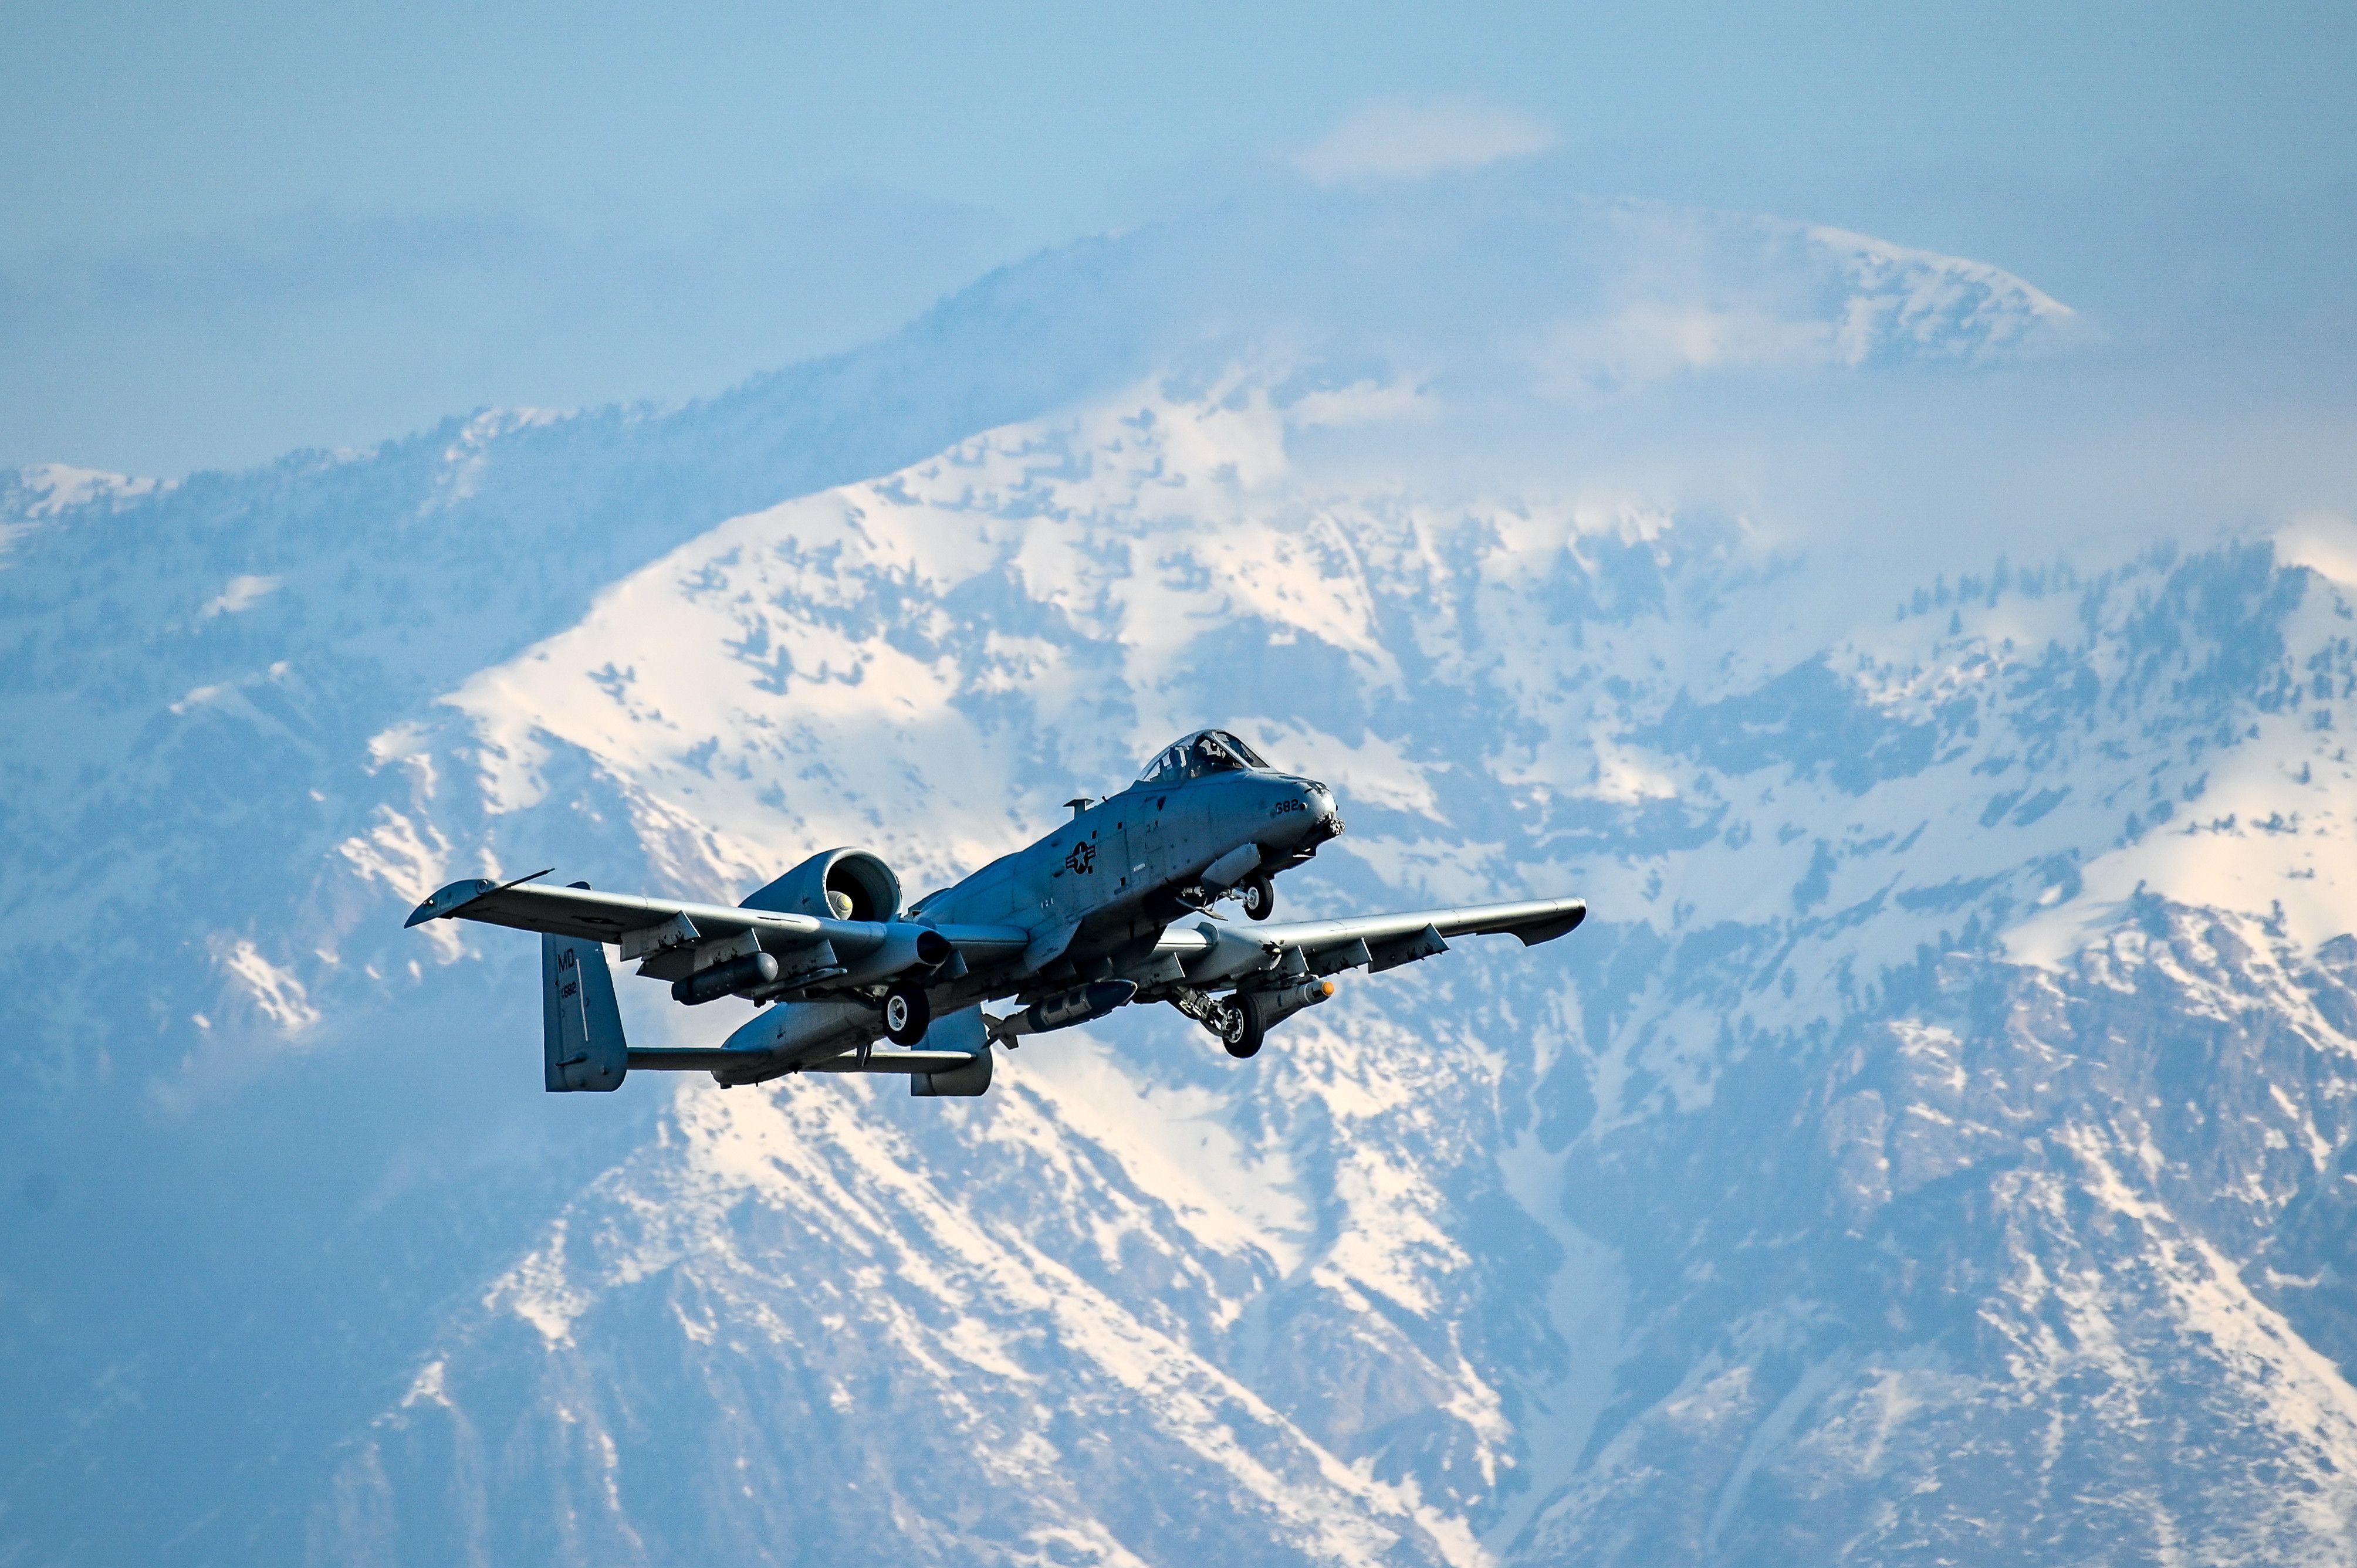 An A-10 Thunderbolt II taking off from Hill Air Force Base, Utah.